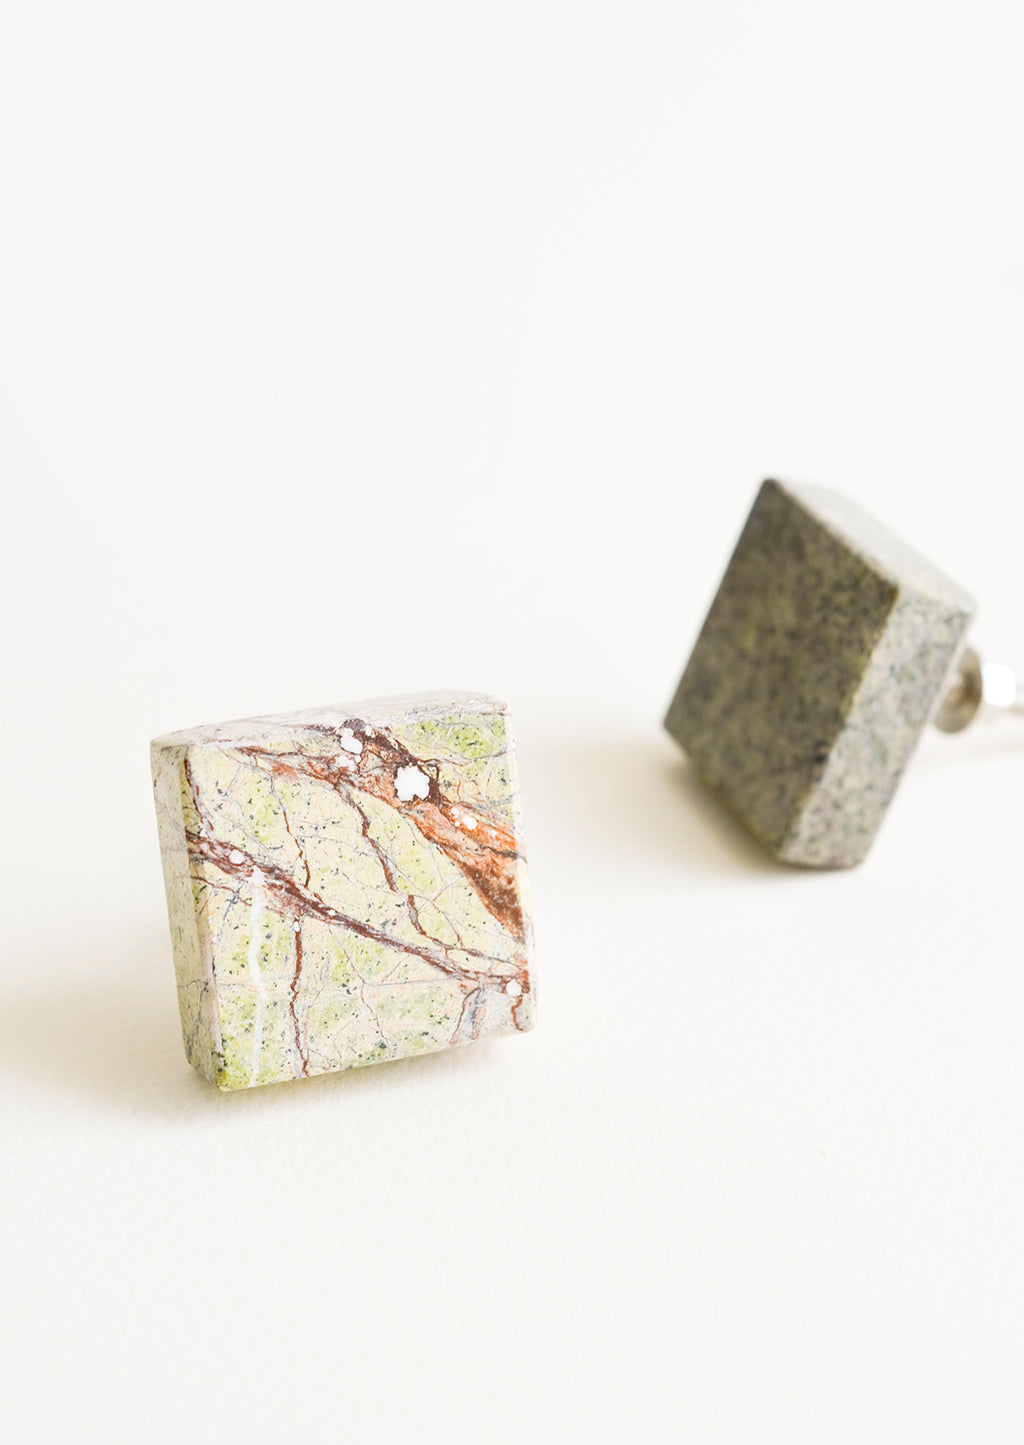 Green Multi: Square stone knob with natural shades of green, orange and brown